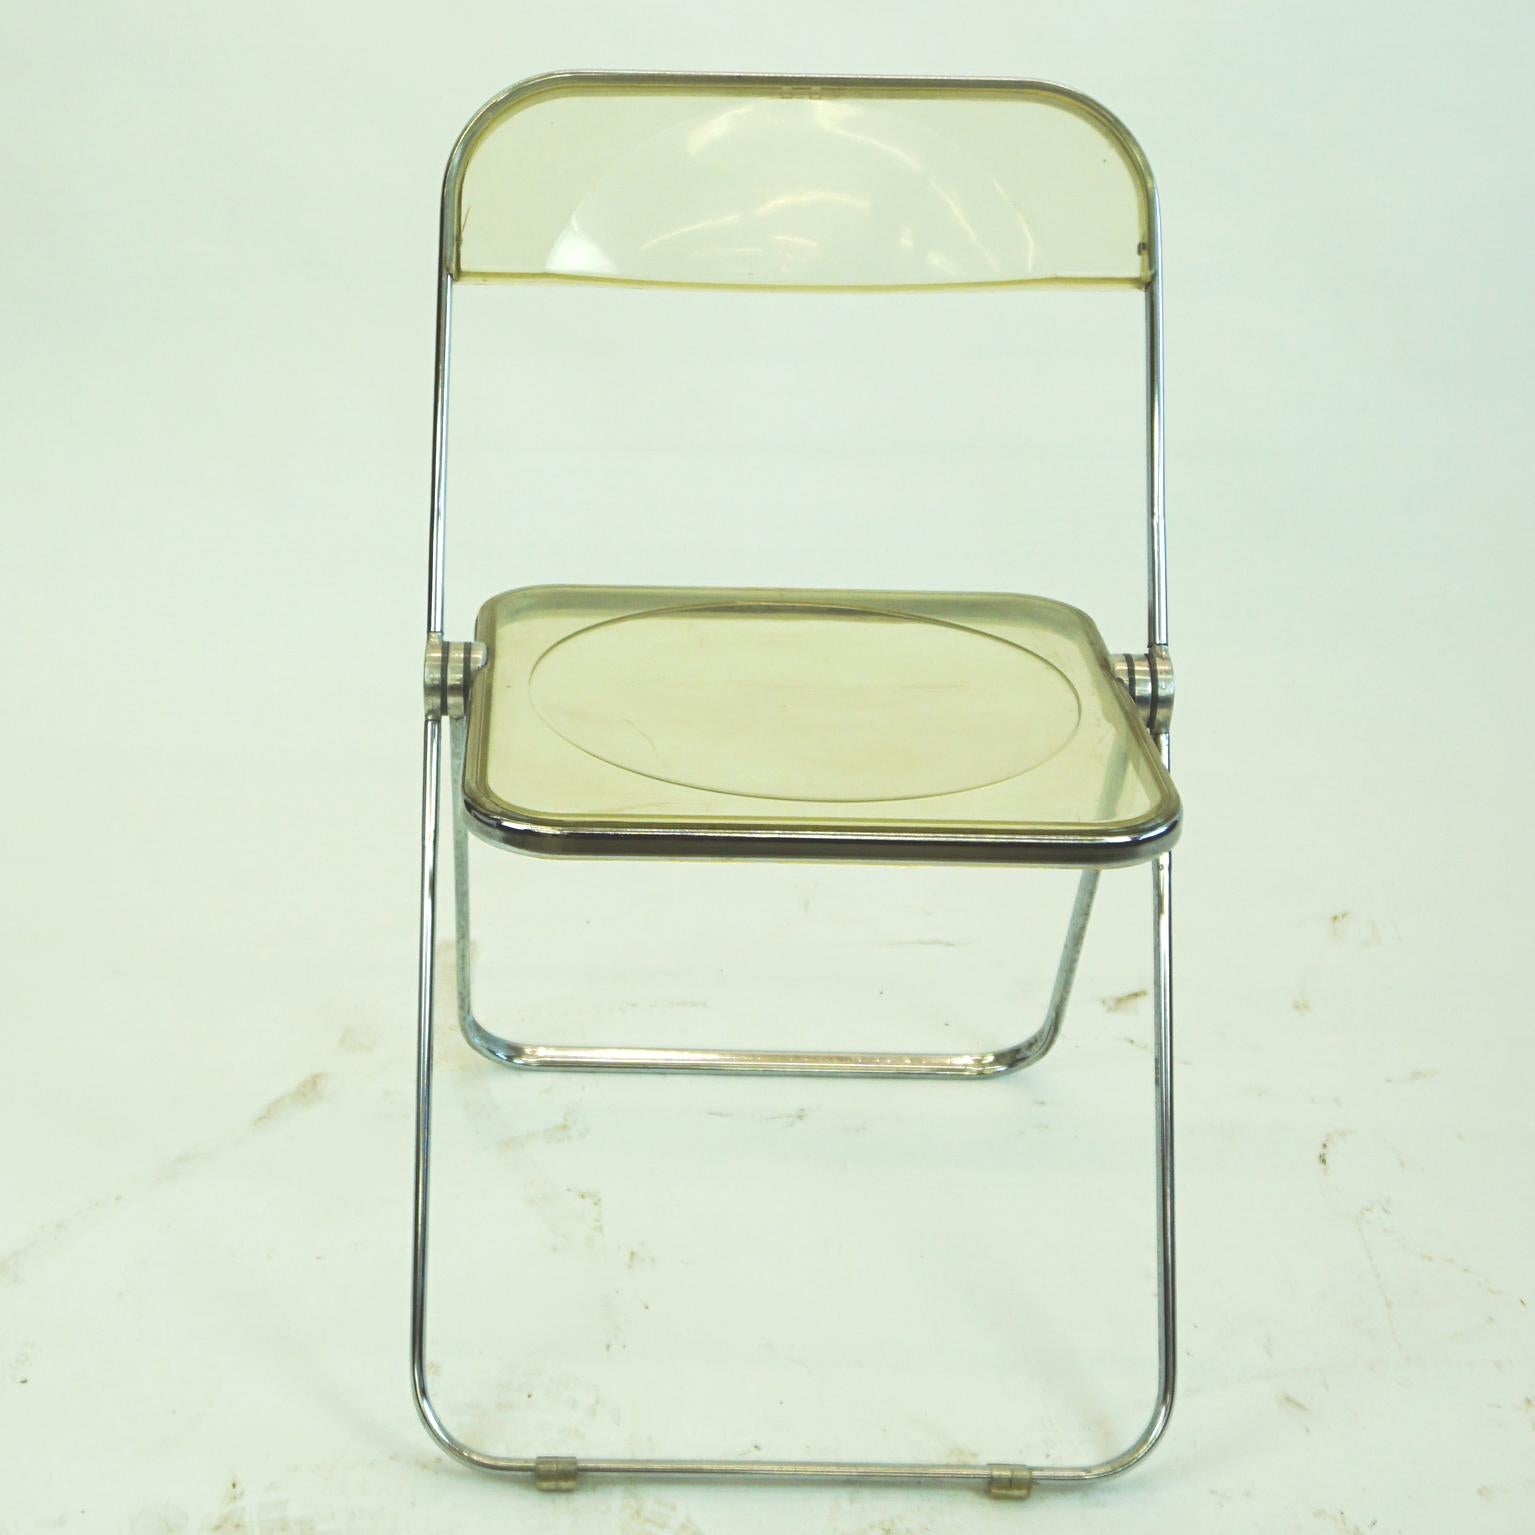 iconic Italian Mid-Century Modern folding chair in Lucite and chrome, designed by Giancarlo Piretti 1967 for Anonima Castelli, Italy. The Plia folding chair is a real design Classic as it won several prices and is part of the MoMA collection as